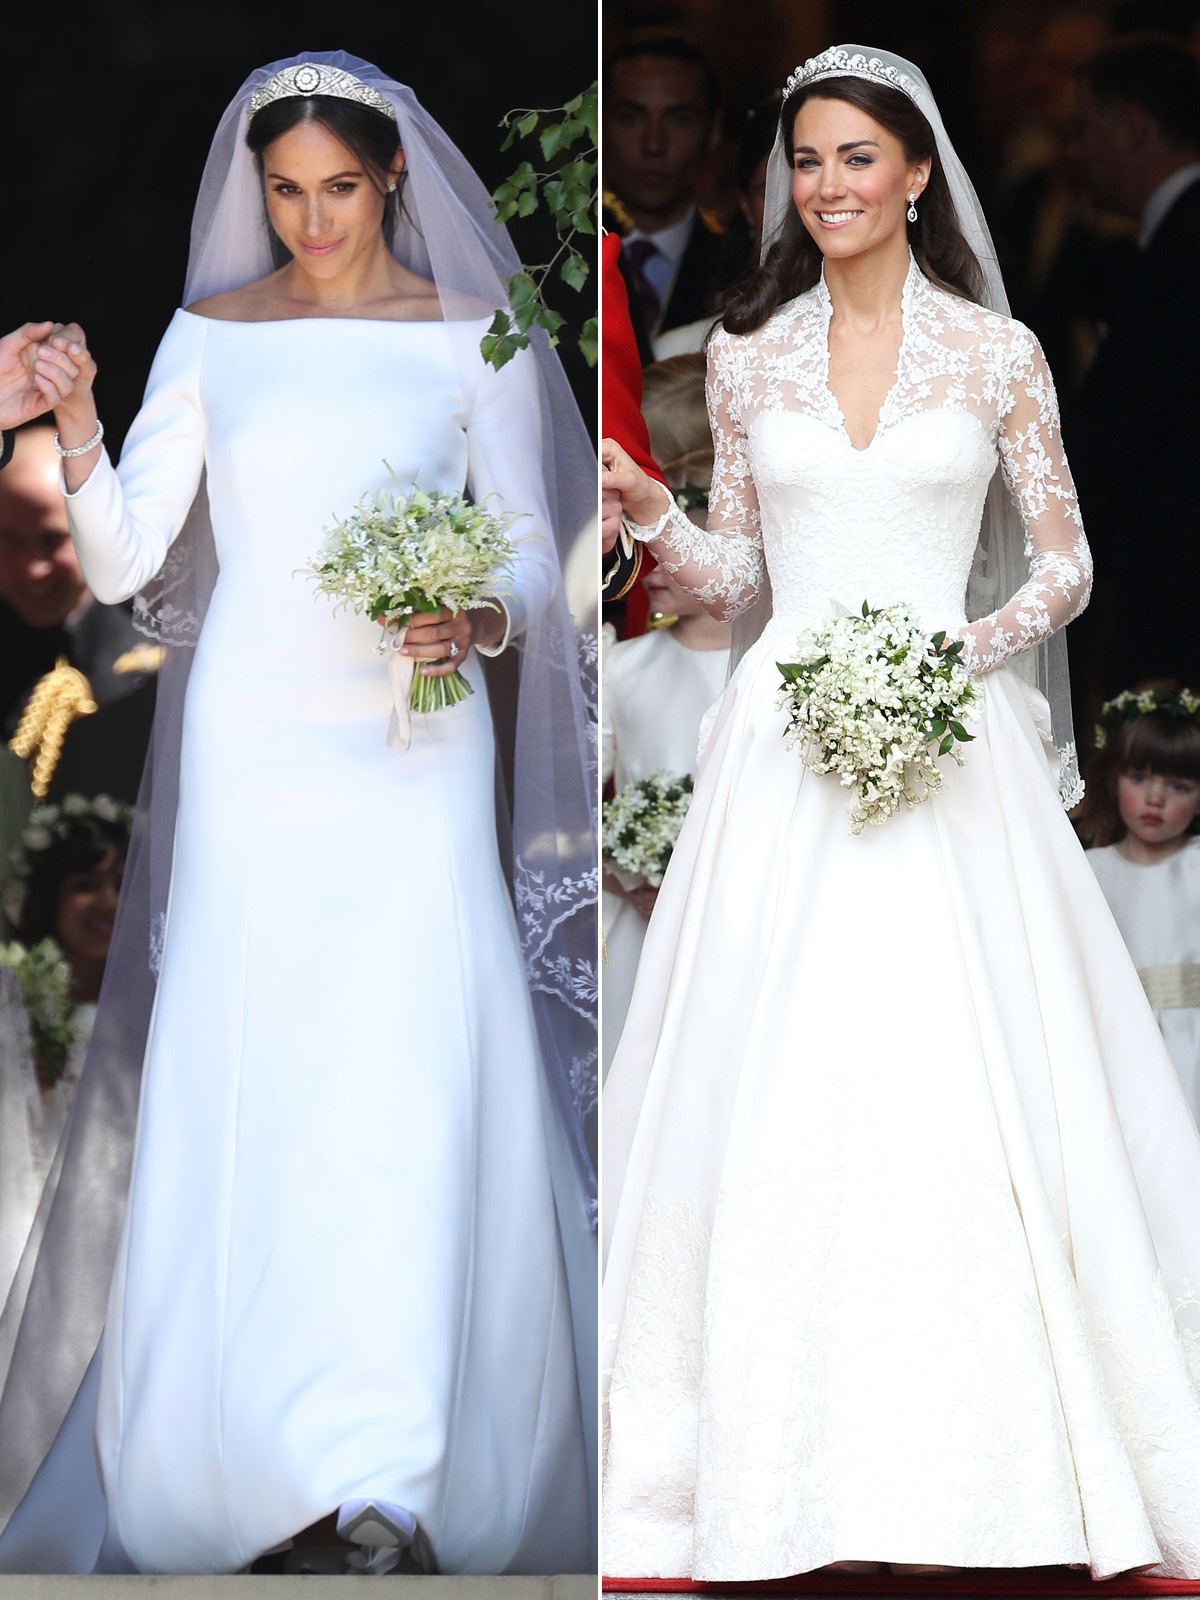 Princess Kate Wedding Gown
 Meghan Markle and Kate Middleton s Wedding Gowns